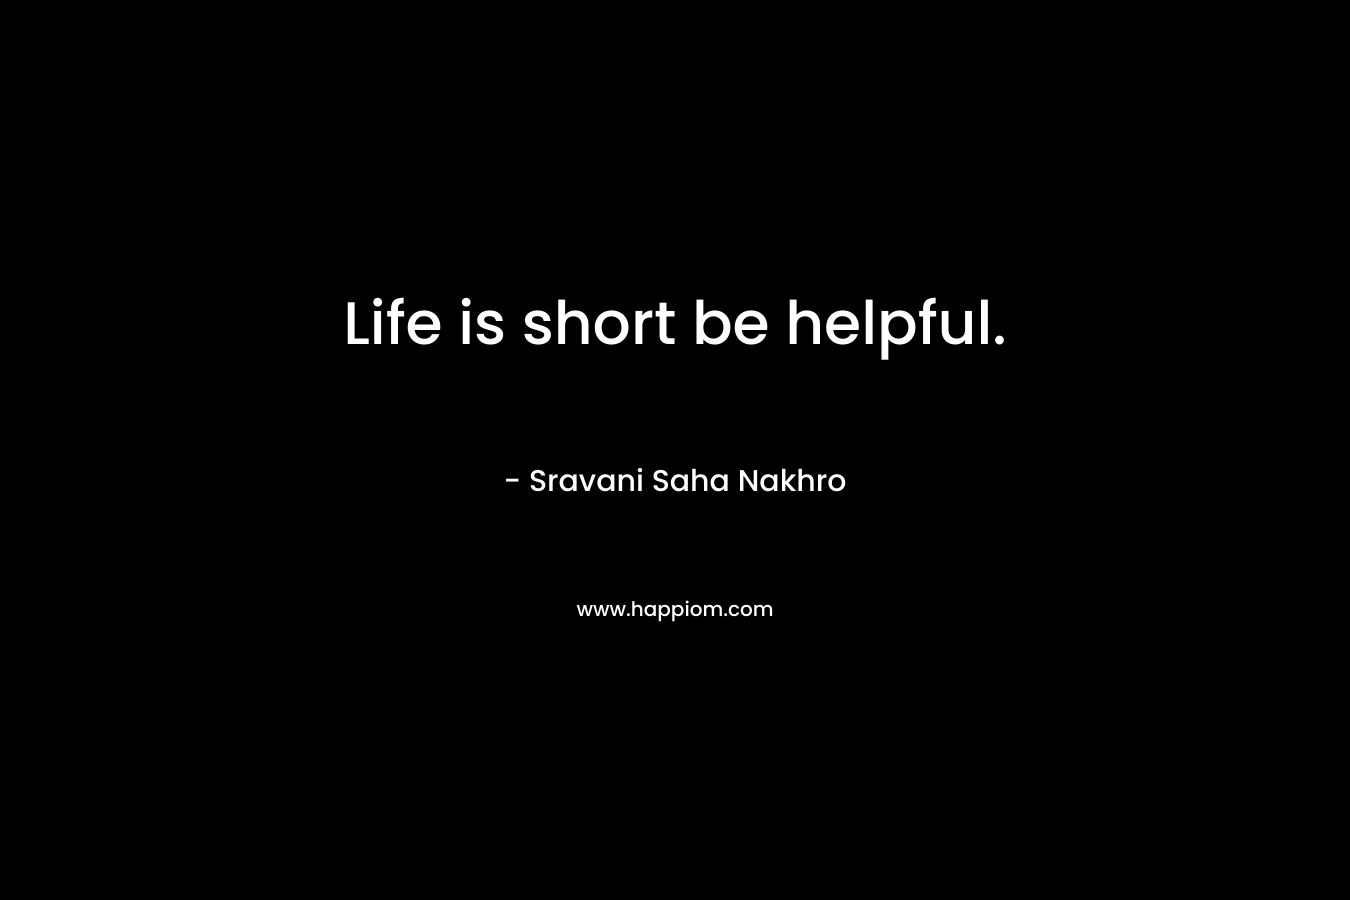 Life is short be helpful.